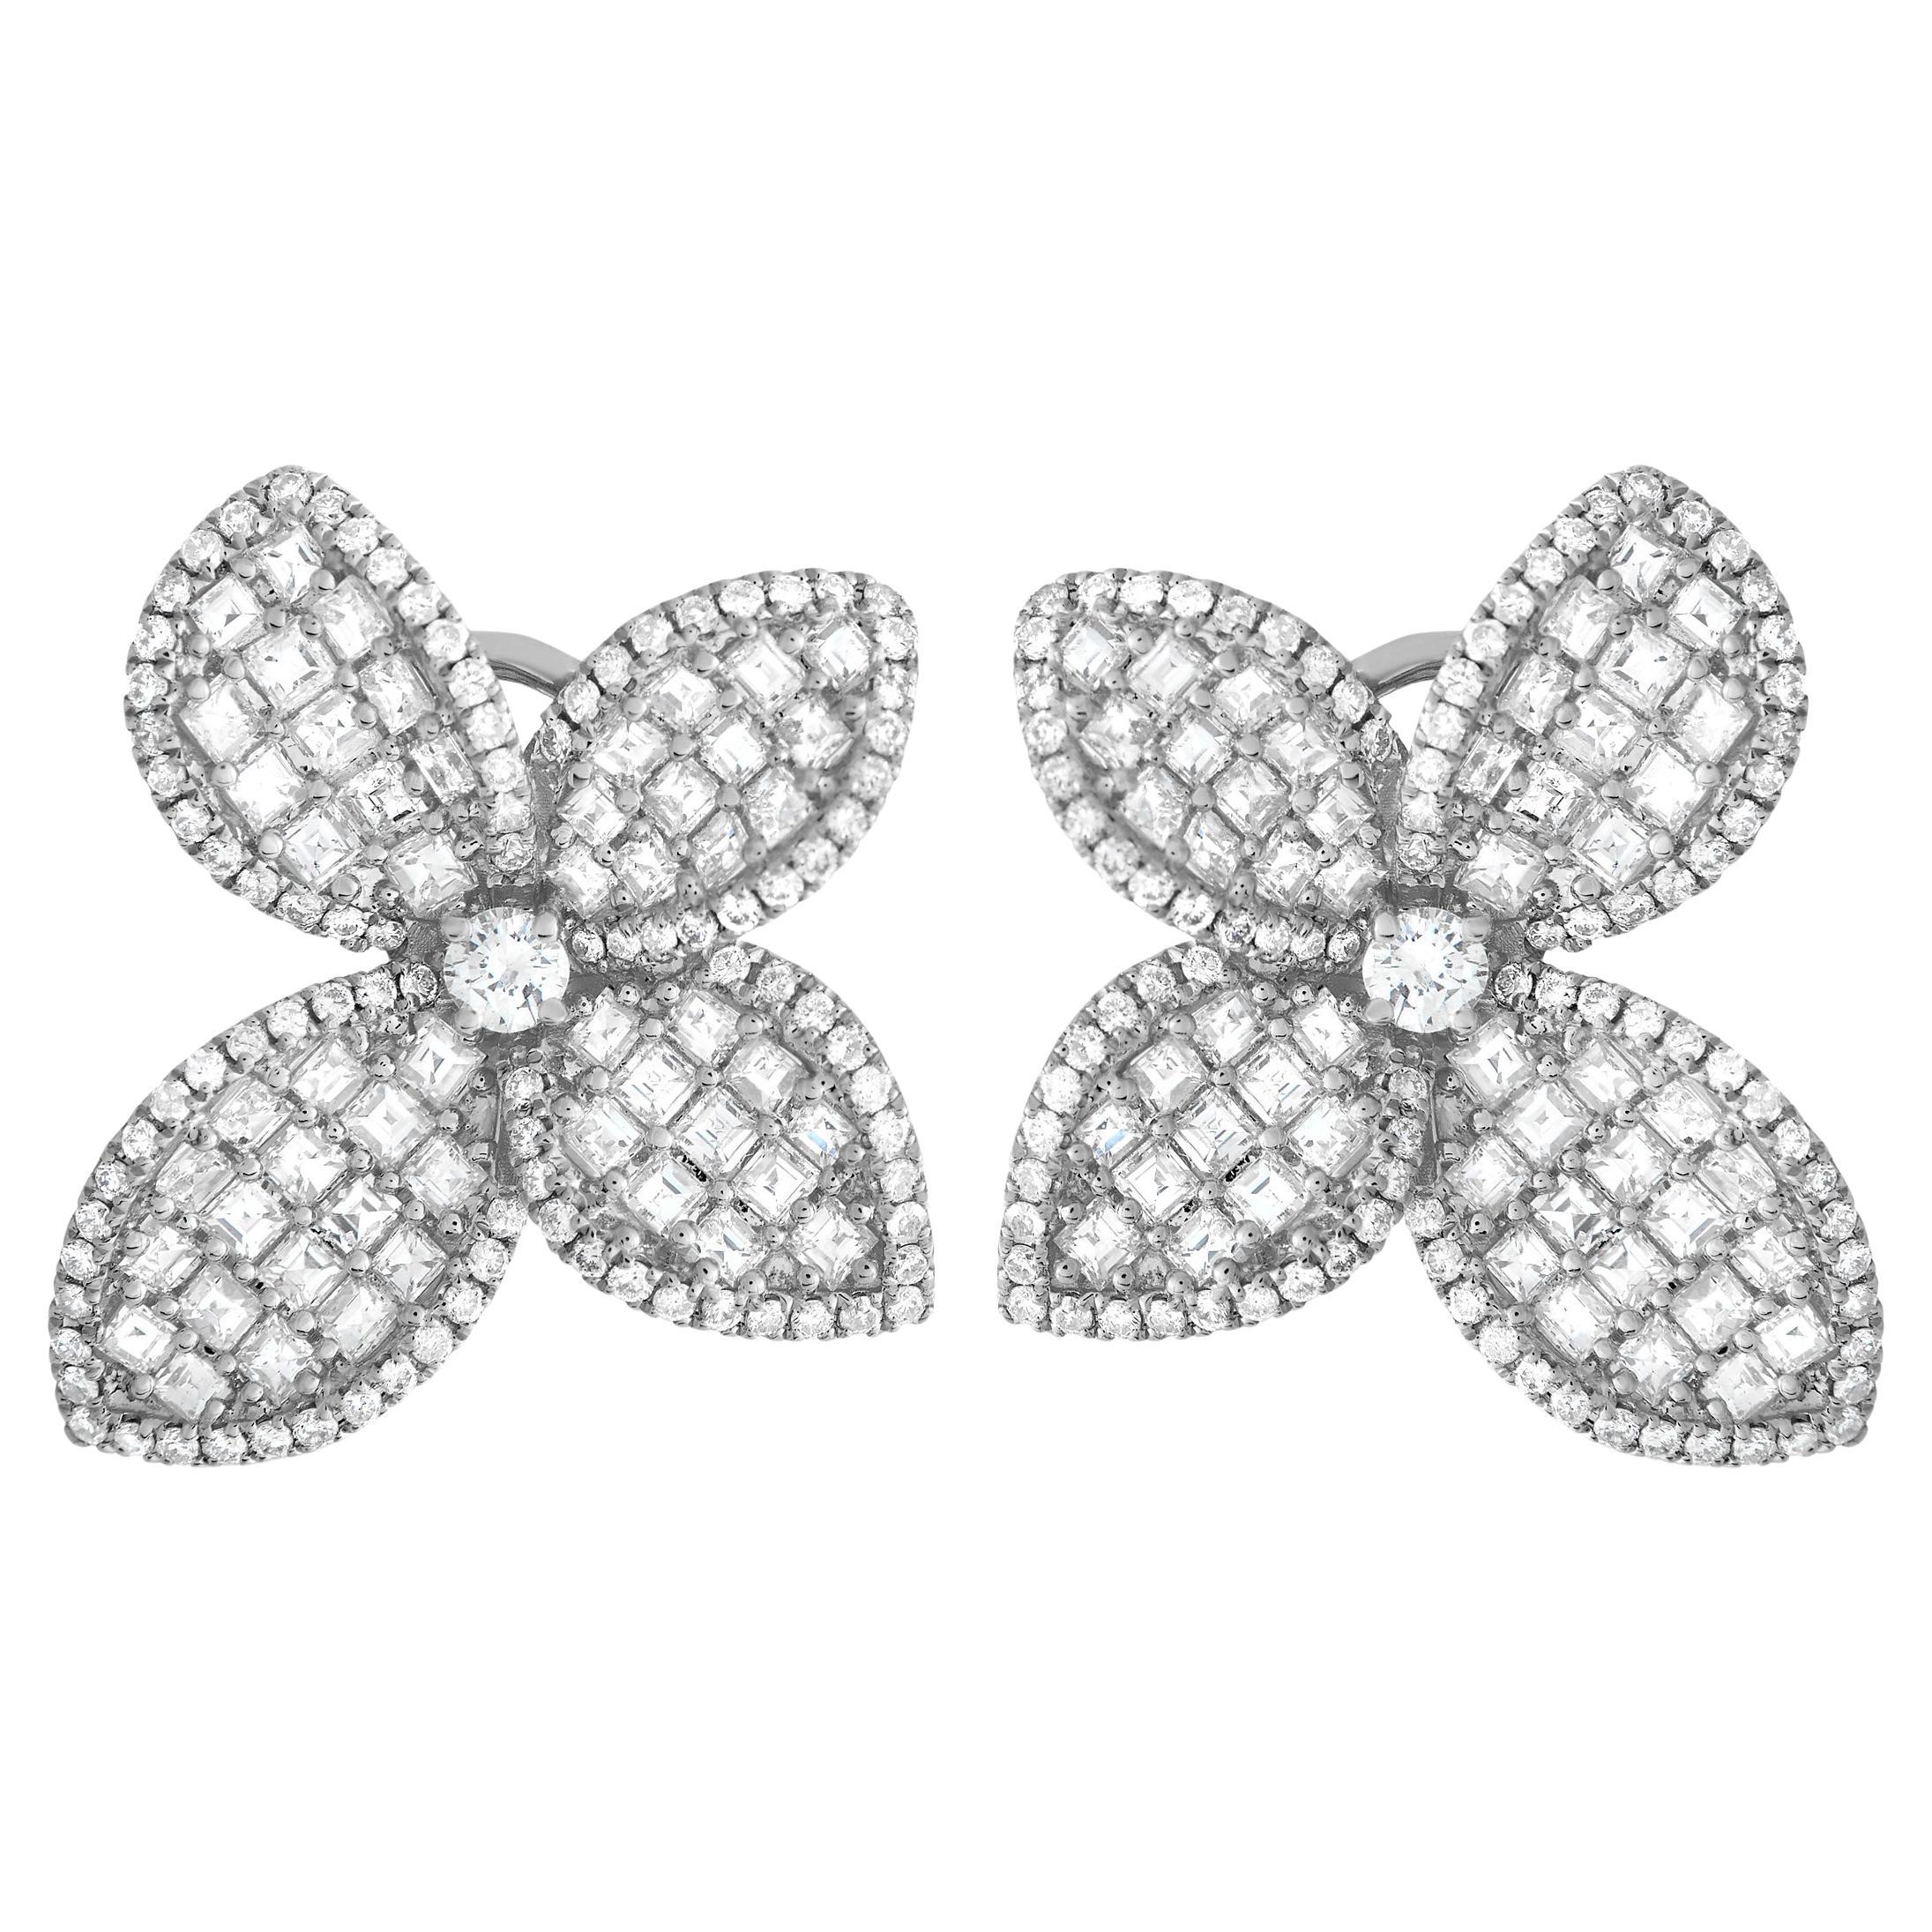 LB Exclusive 18K White Gold 4.01ct Diamond Flower Earrings For Sale